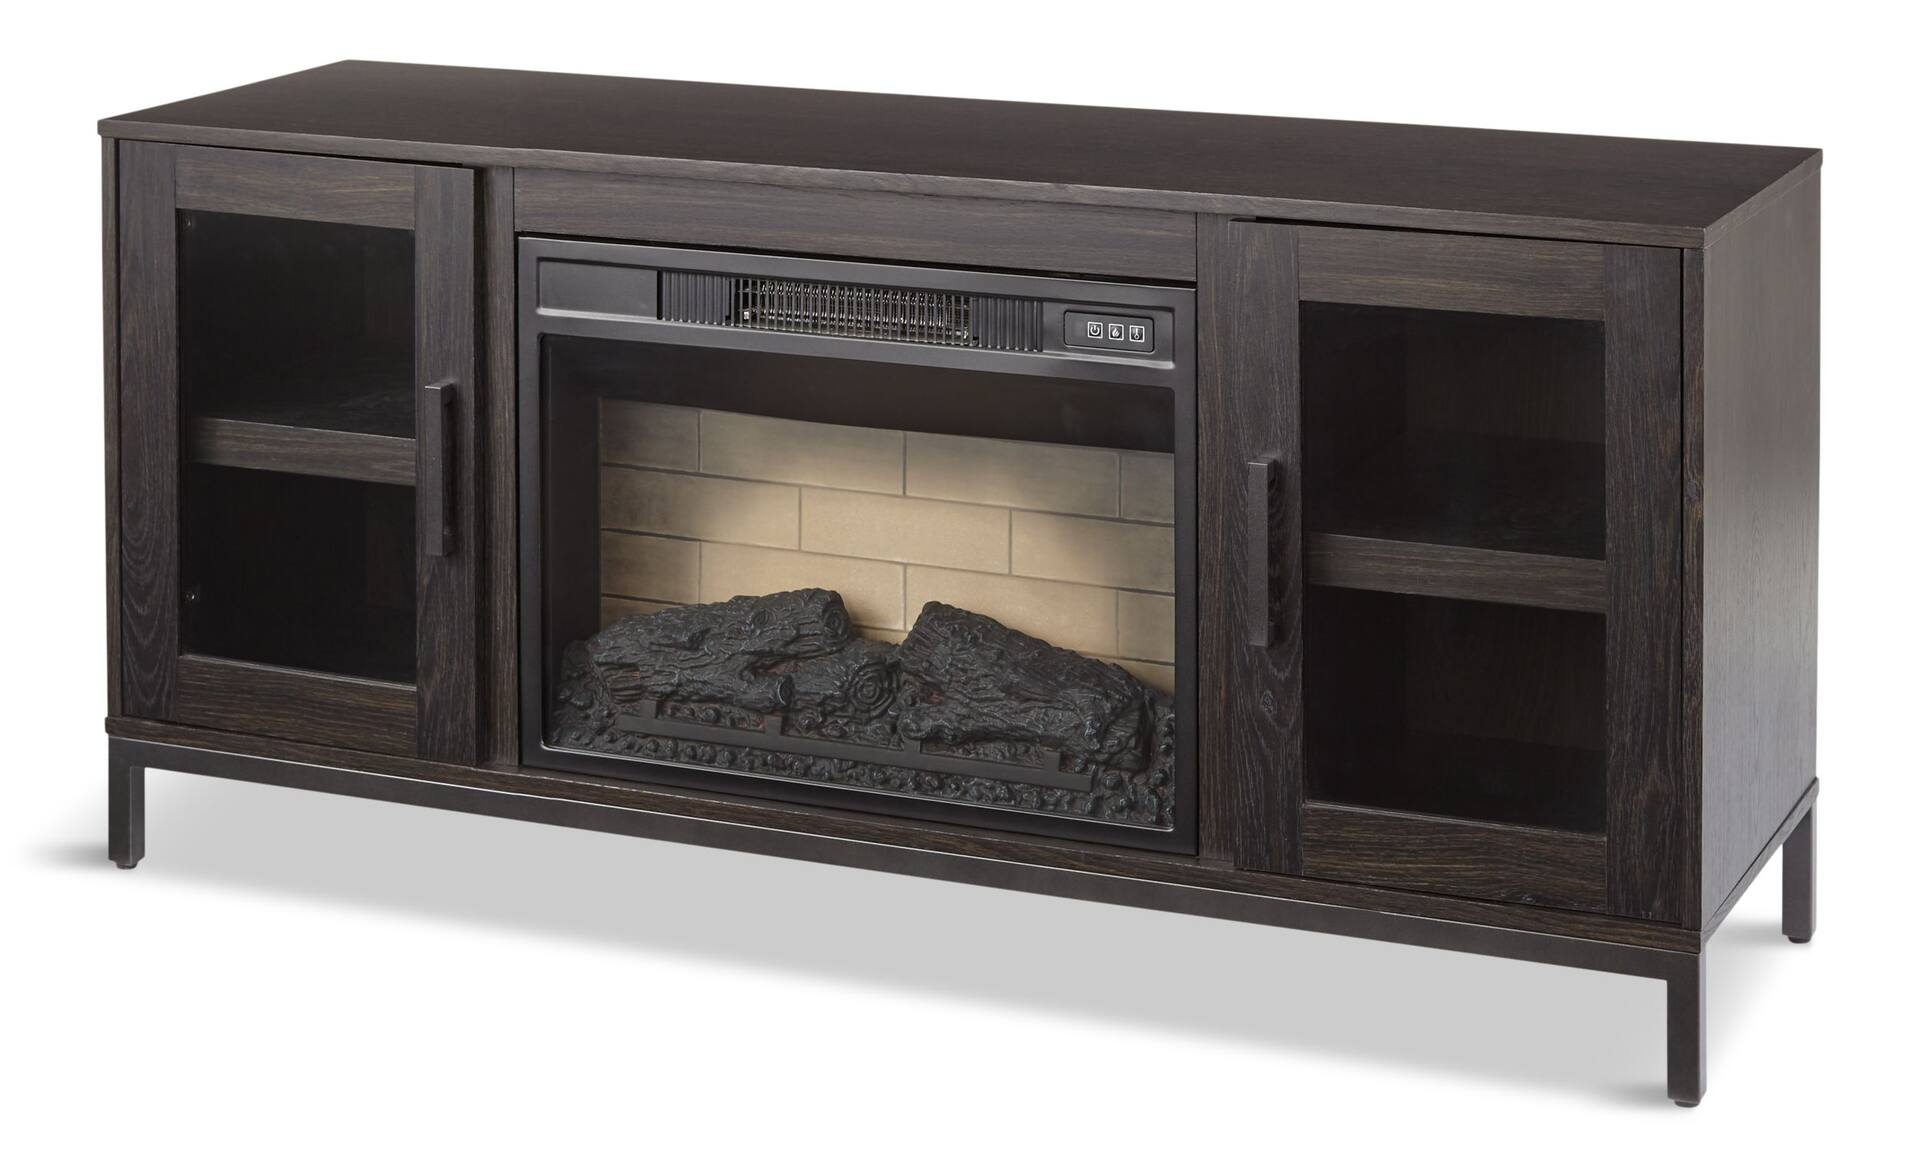 Electric　Canadian　Remote　Console　TV　1400W,　Brown　Control,　Stand,　Fireplace　Includes　54-in,　CANVAS　Media　Canmore　Tire